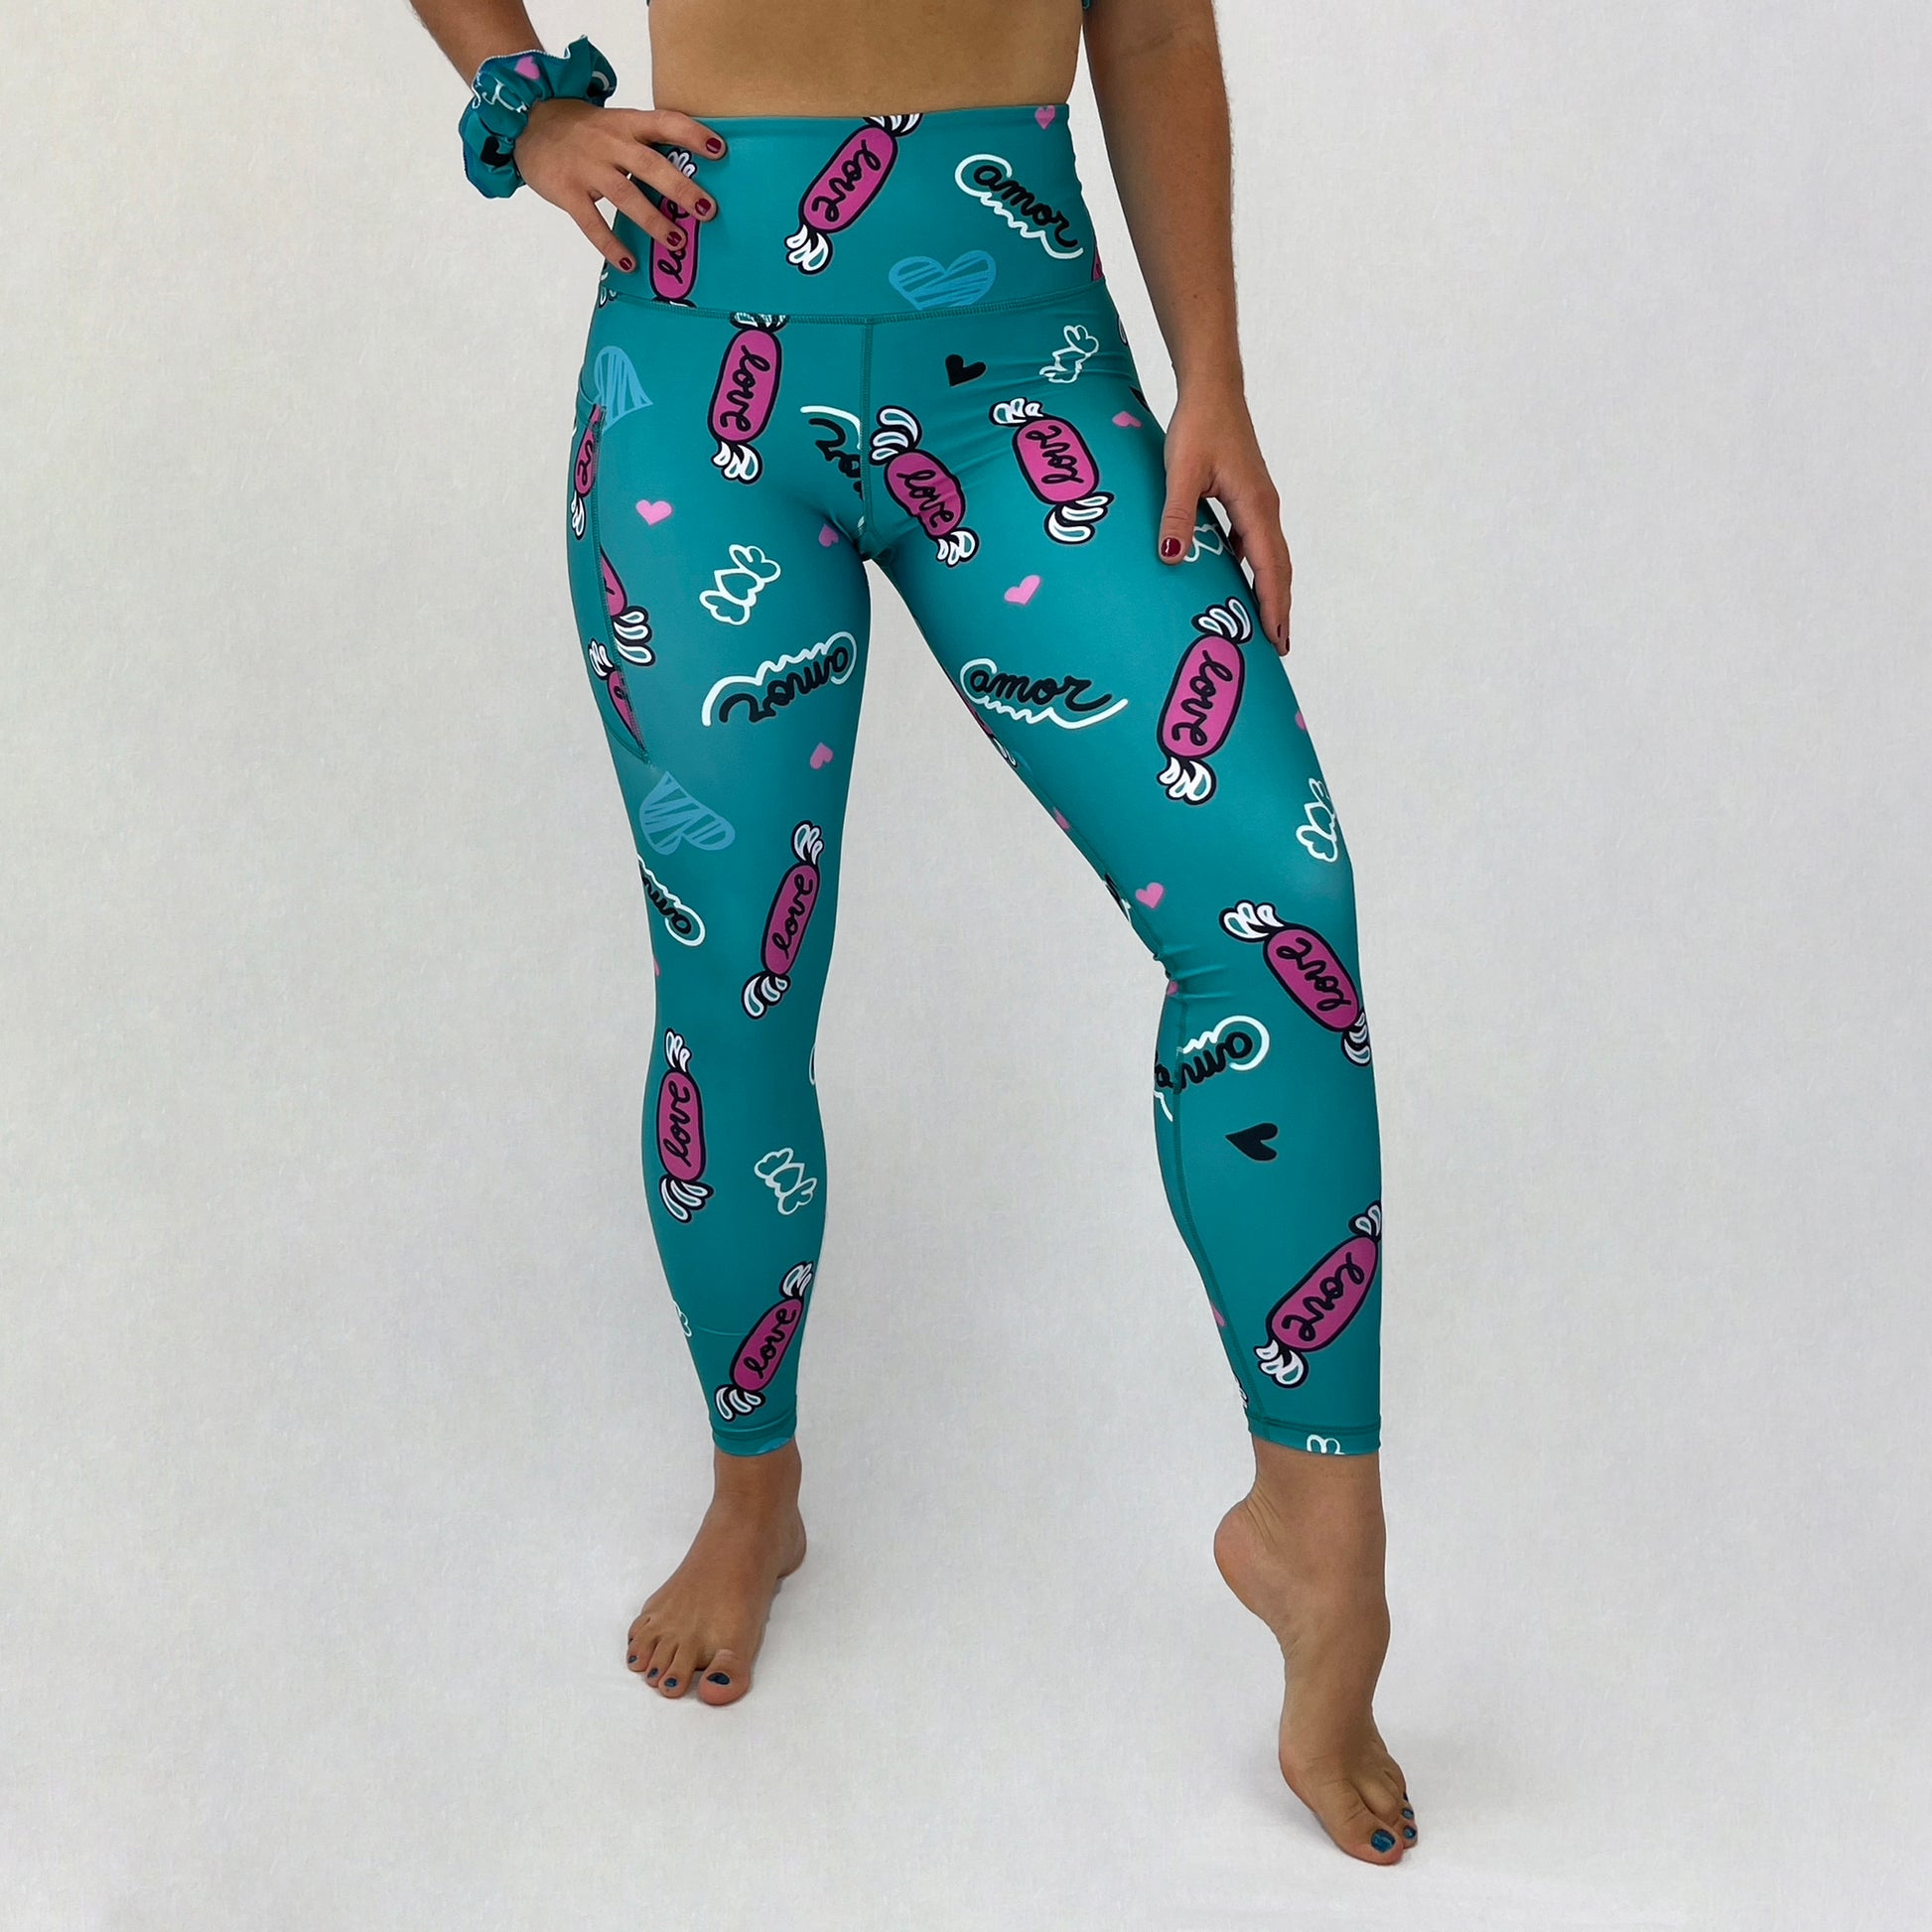 Ethical High Waisted full length Leggings Oda in Love by Monique Baqués front